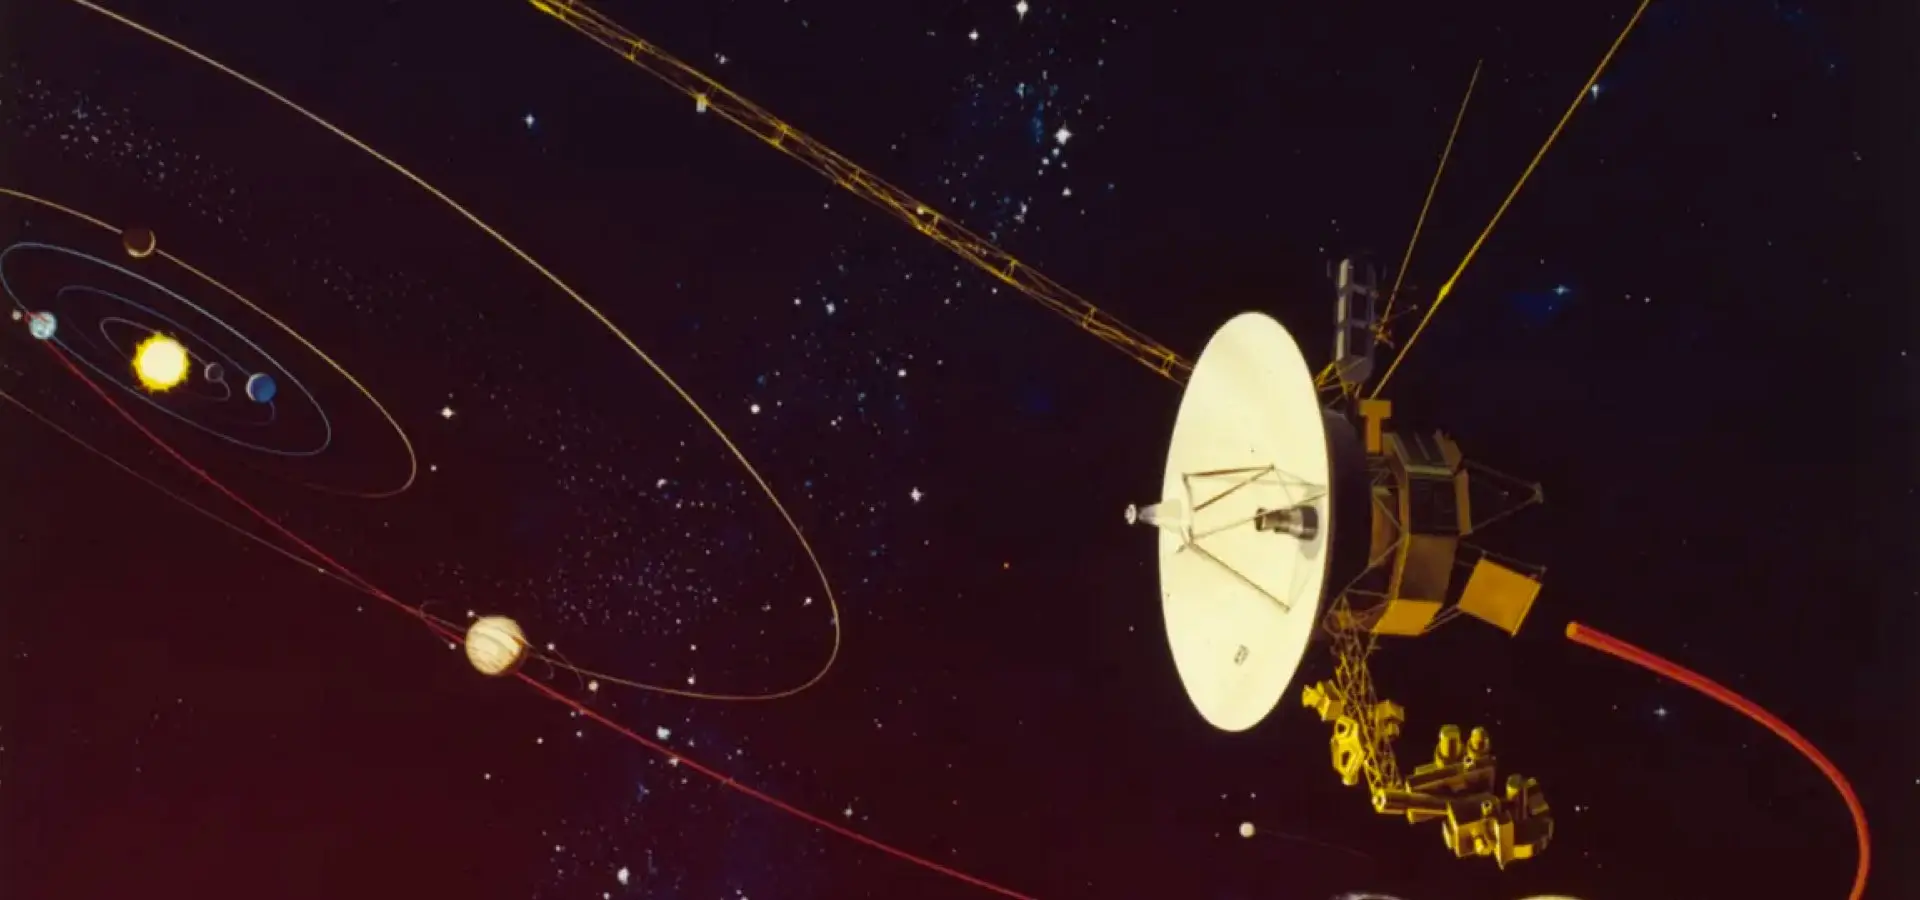 NASA's Voyager 2 Faces Communication Glitch, But Mission Remains On Course web